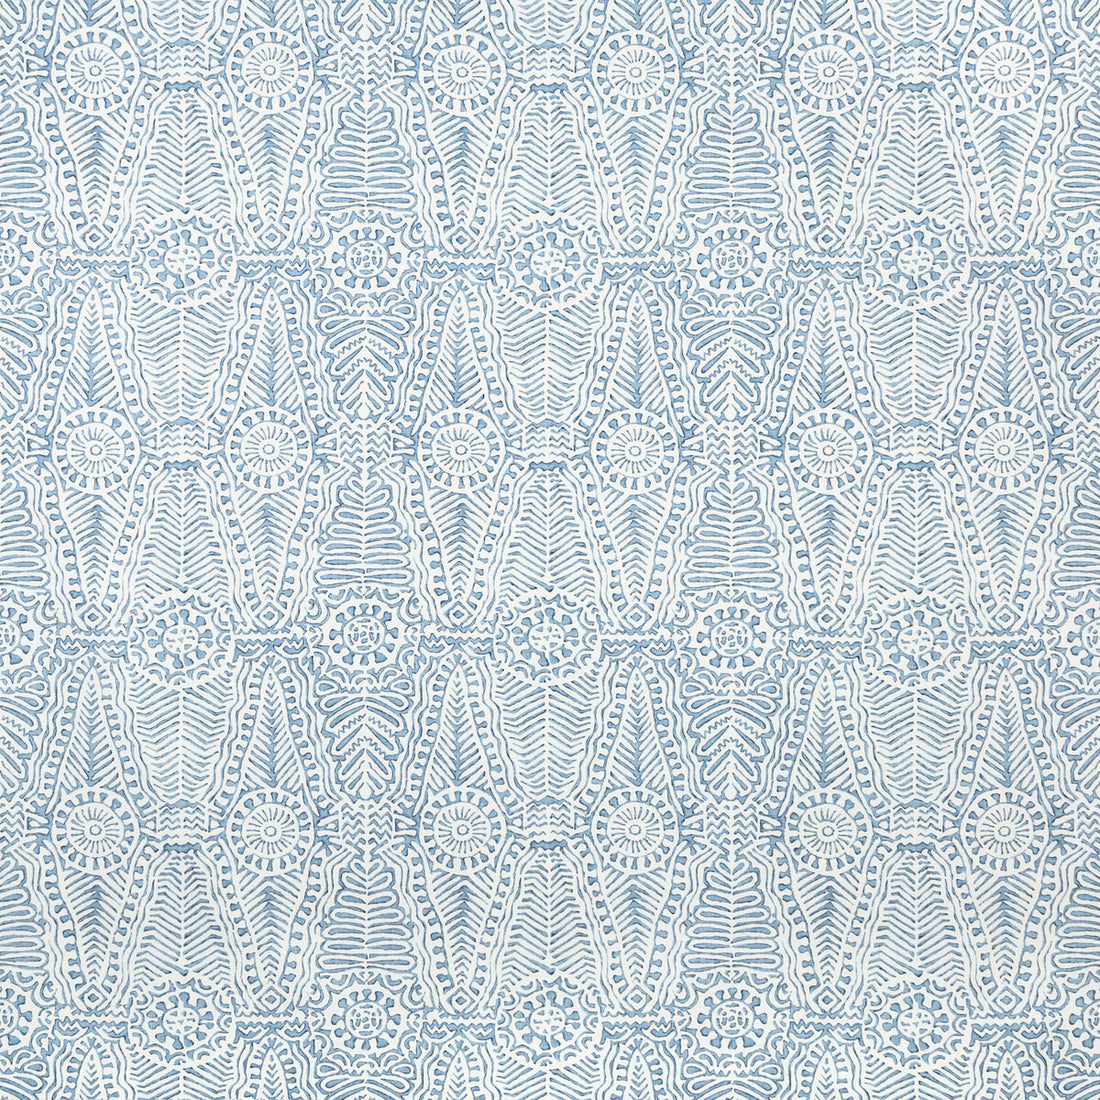 Drayton Print fabric in denim color - pattern 2020184.5.0 - by Lee Jofa in the Avondale collection